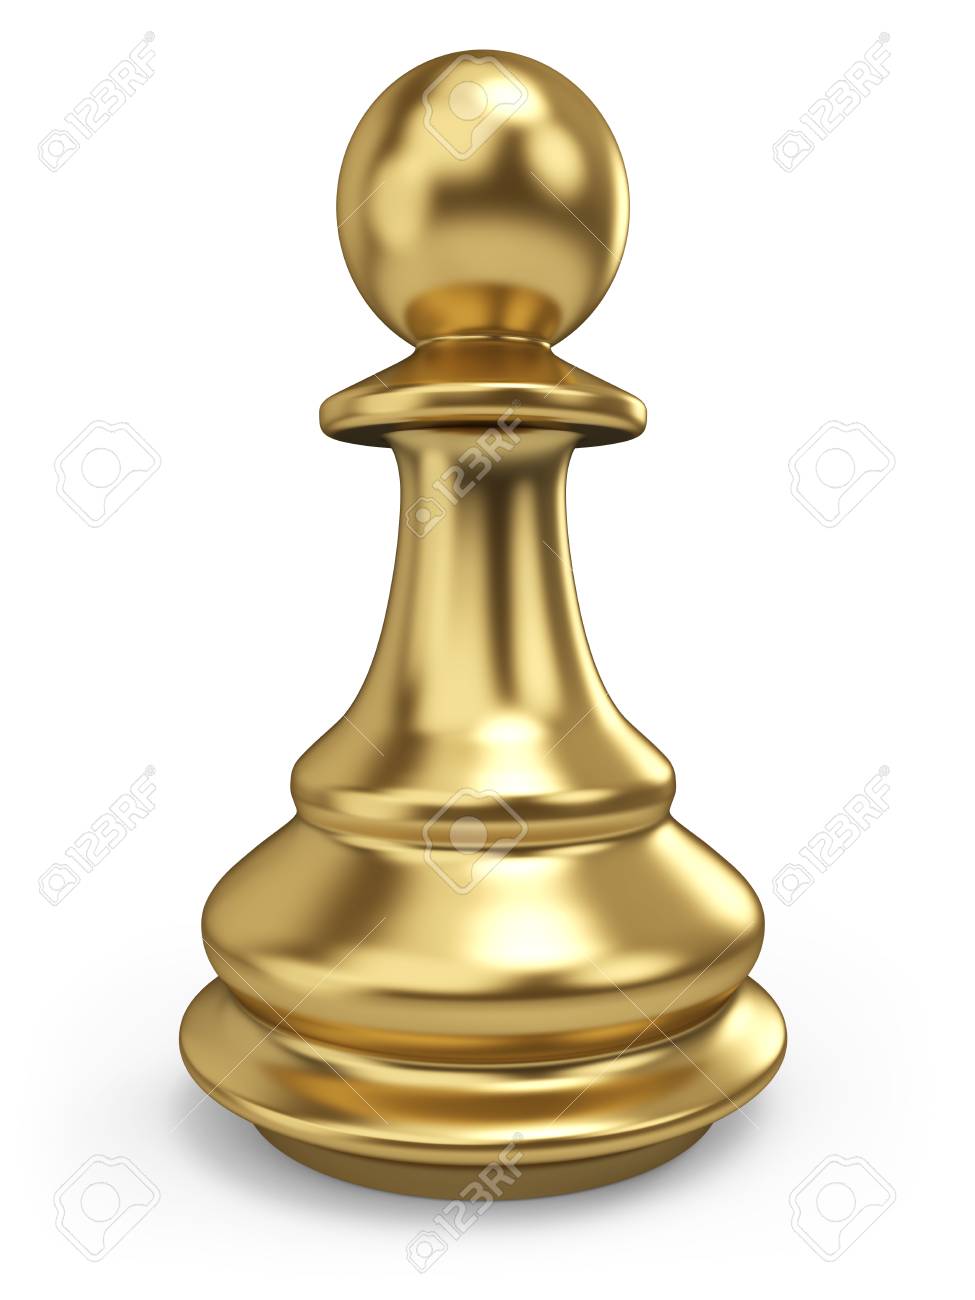 Single Gold Chess Pawn Isolated On White Background 3d Rendering